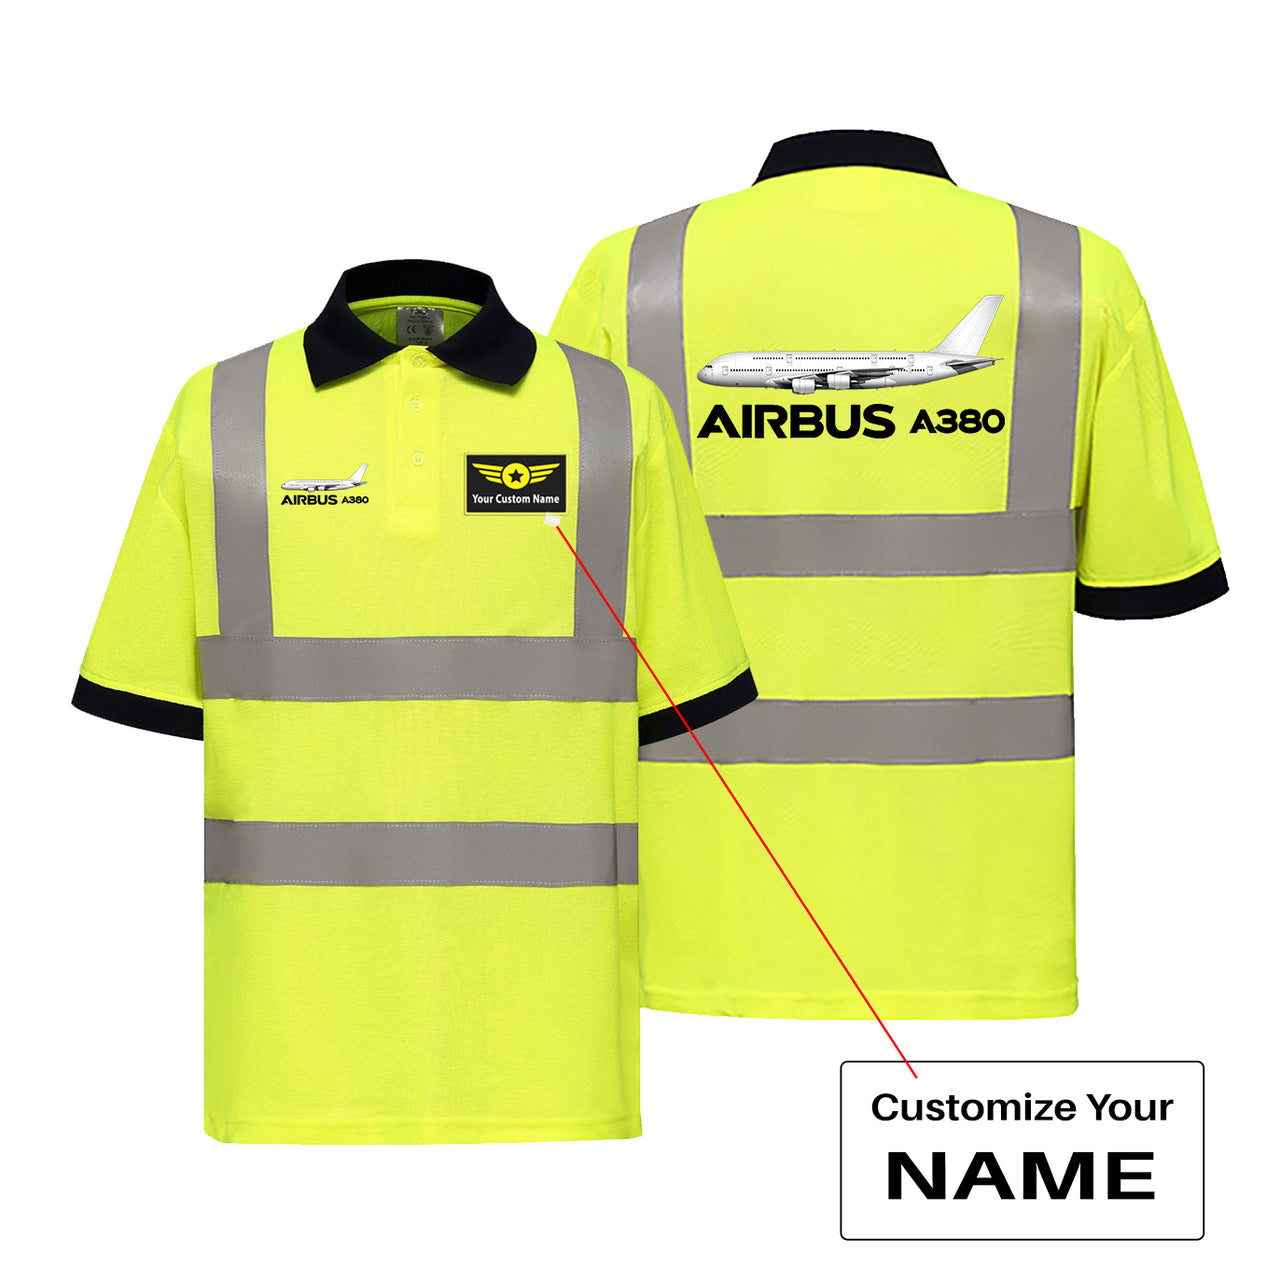 The Airbus A380 Designed Reflective Polo T-Shirts